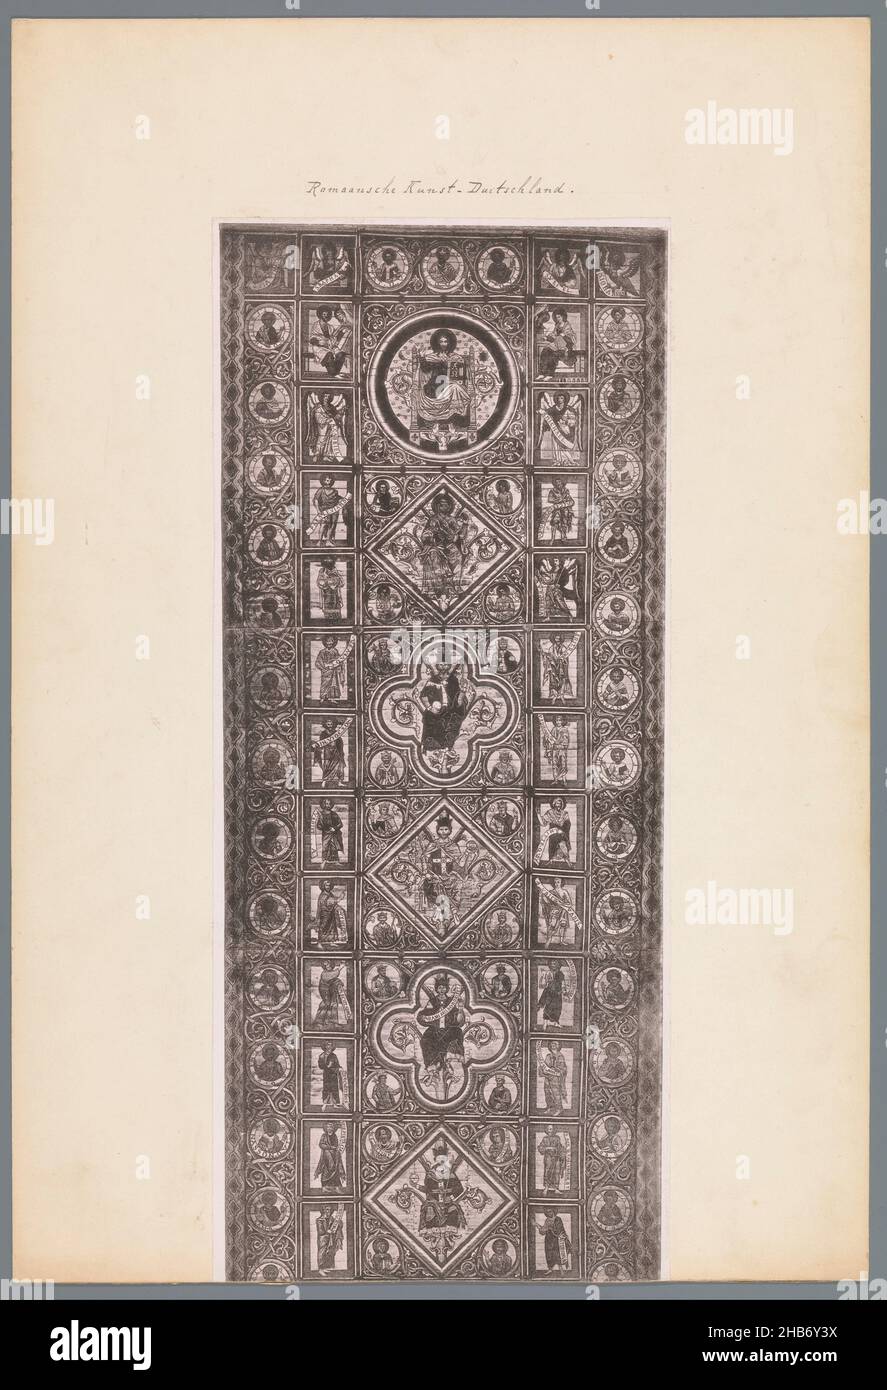 Ceiling painting of the Michaeliskirche in Hildesheim, depicting the genealogy of Christ, anonymous, Michaeliskirche, c. 1875 - c. 1900, cardboard, paper, collotype, height 358 mm × width 154 mm Stock Photo